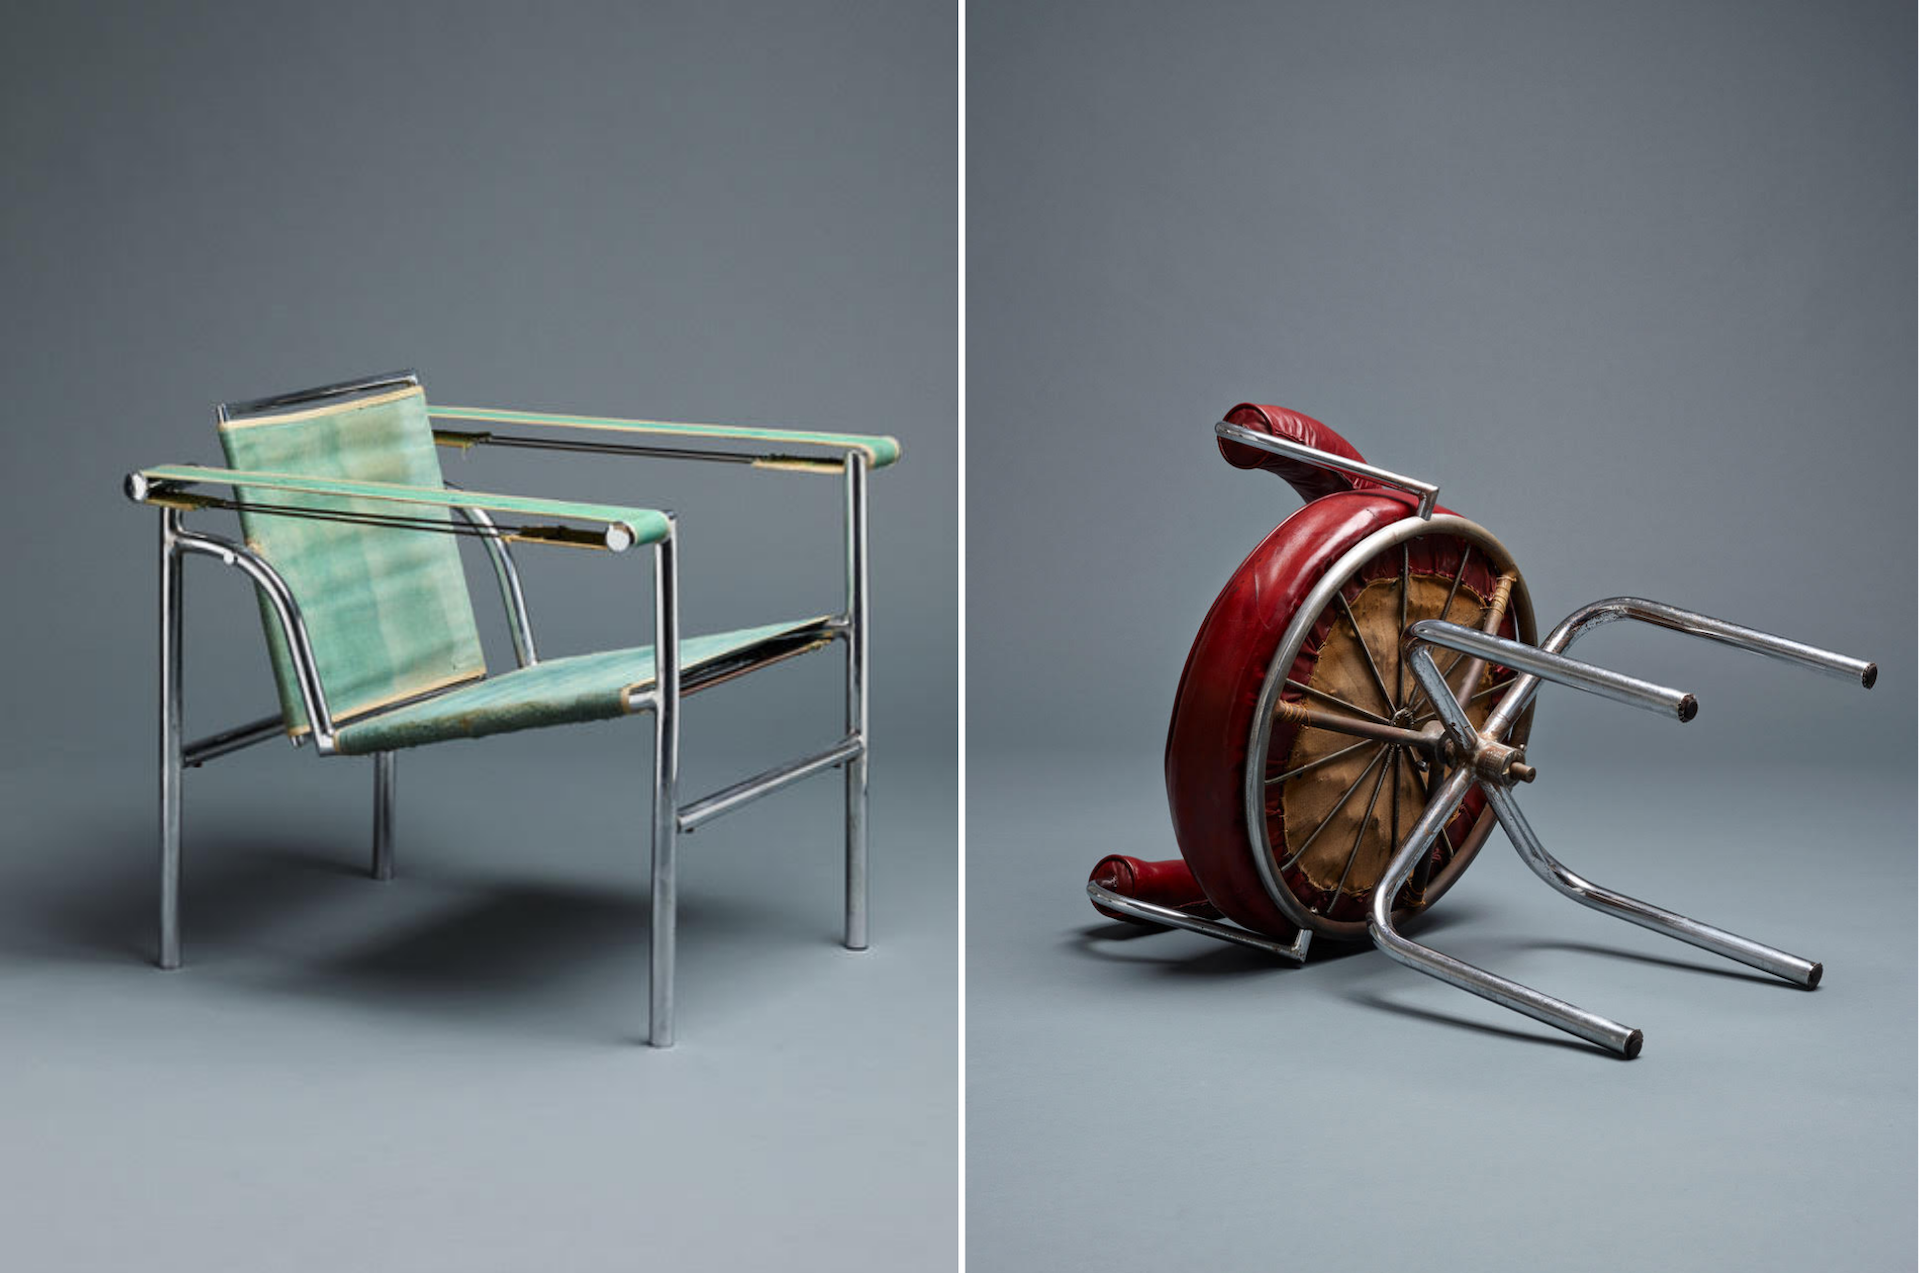 Armchair Siège à Dossier Basculant, 1929, and Swivel Chair Siège Pivotant, 1927, both by Le Corbusier, Charlotte Perriand, and Pierre Jeanneret. Photos © Galerie Ulrich Fiedler